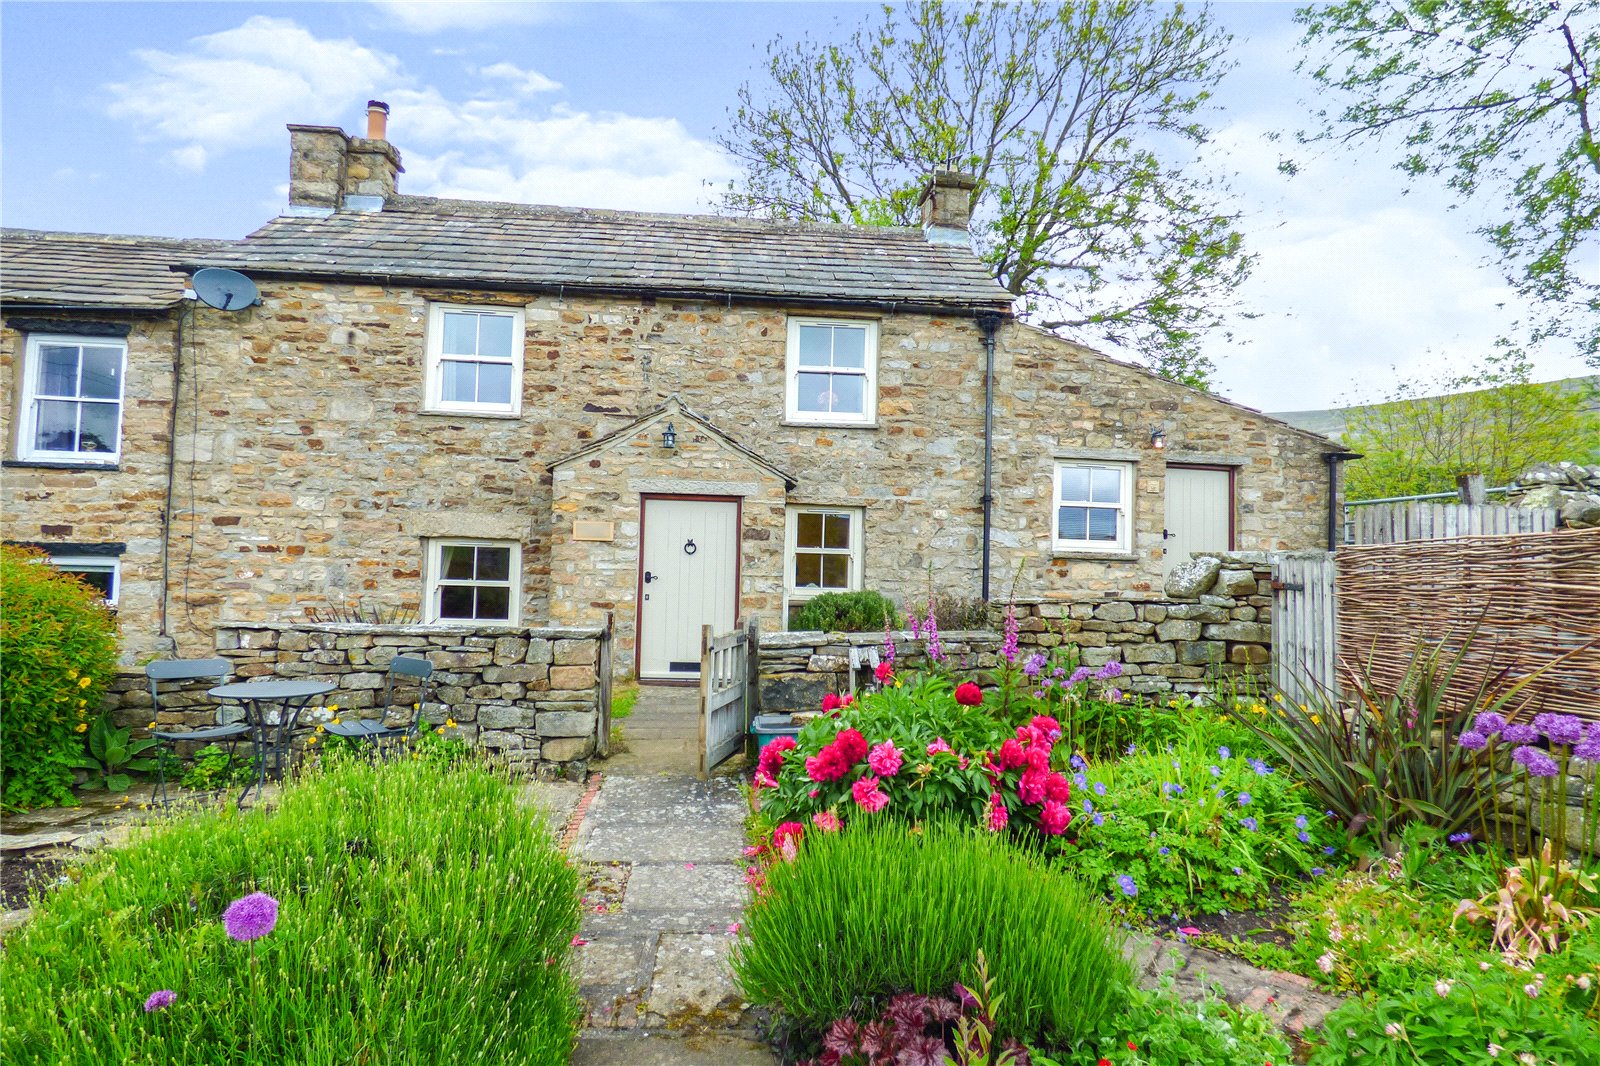 2 Bedroom Semi-Detached House for sale in Reeth, Richmond